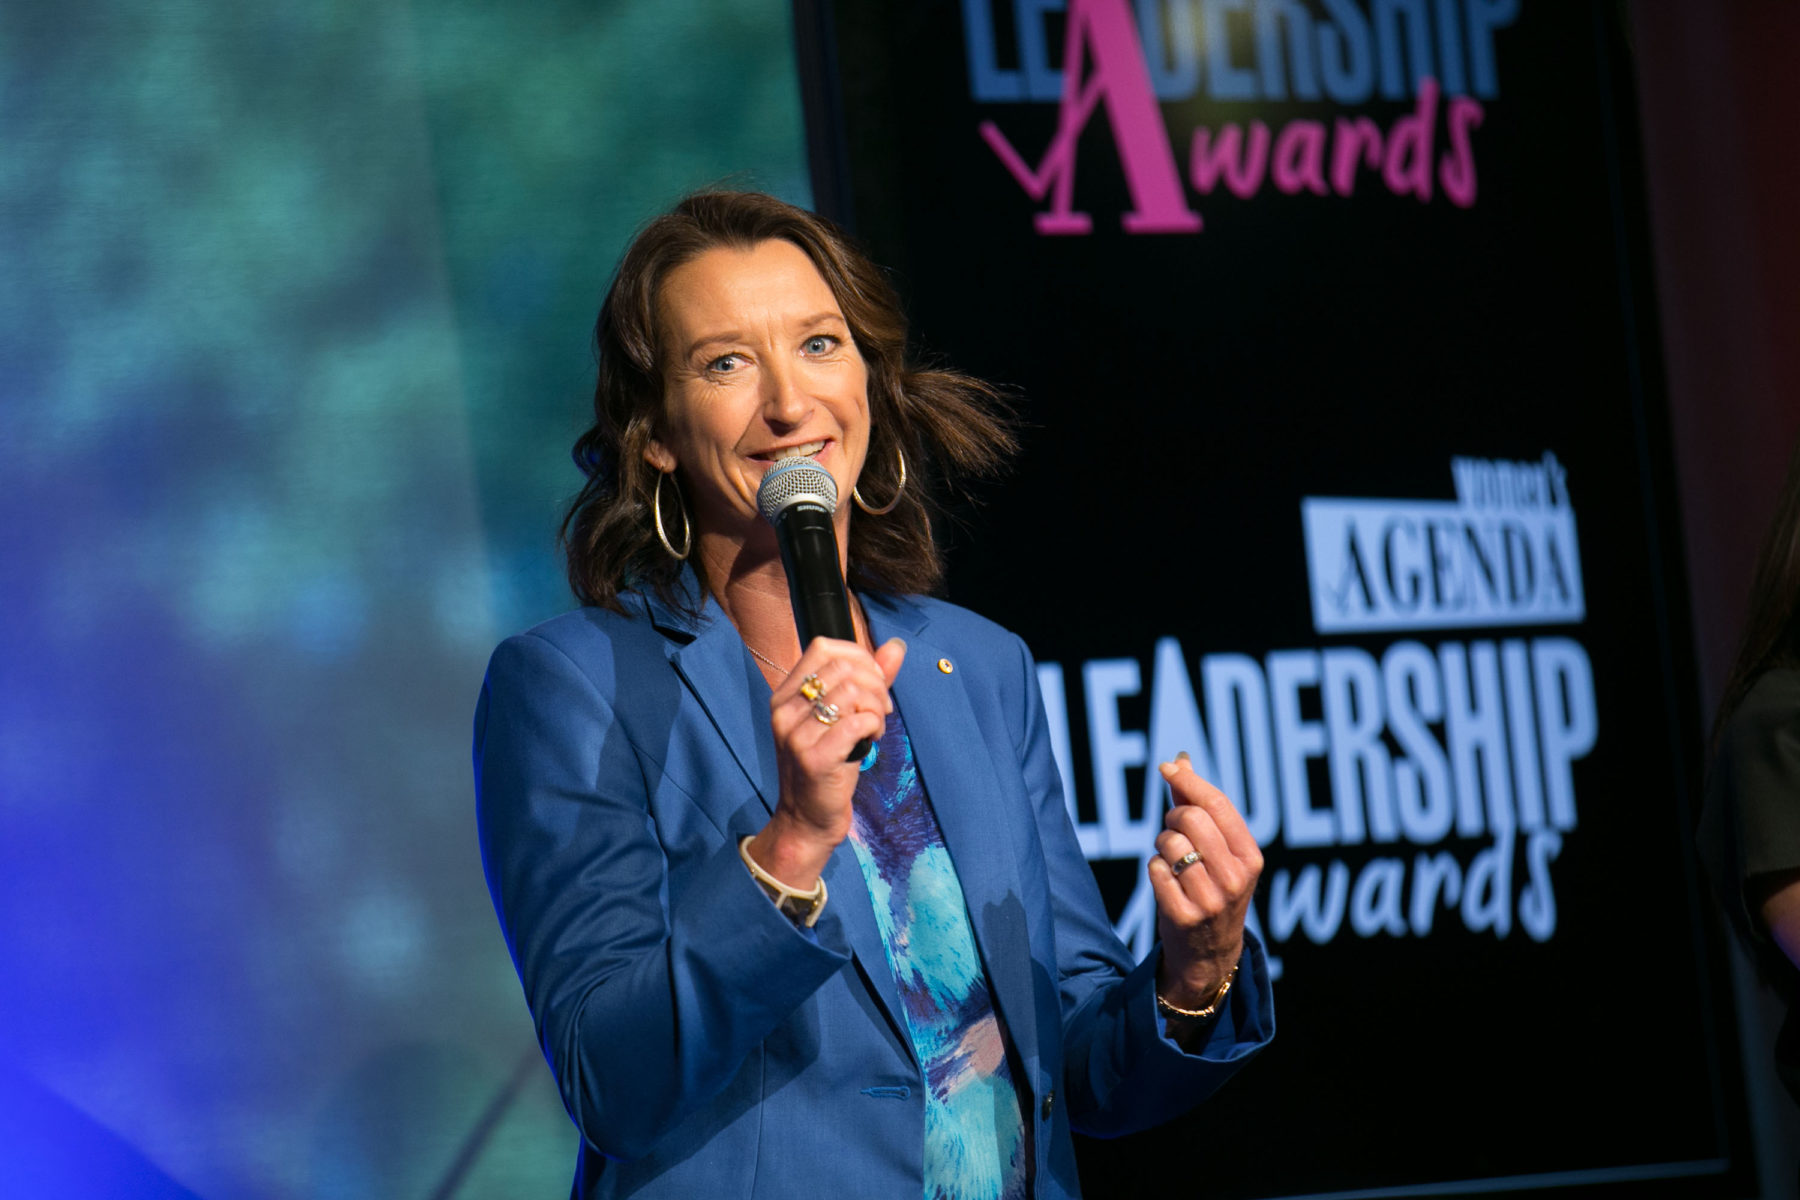 layne-beachley-ao-surf-world-champion-the-news-women-s-agenda-awards-2016:-layne-attends-as-a-guest-panelist